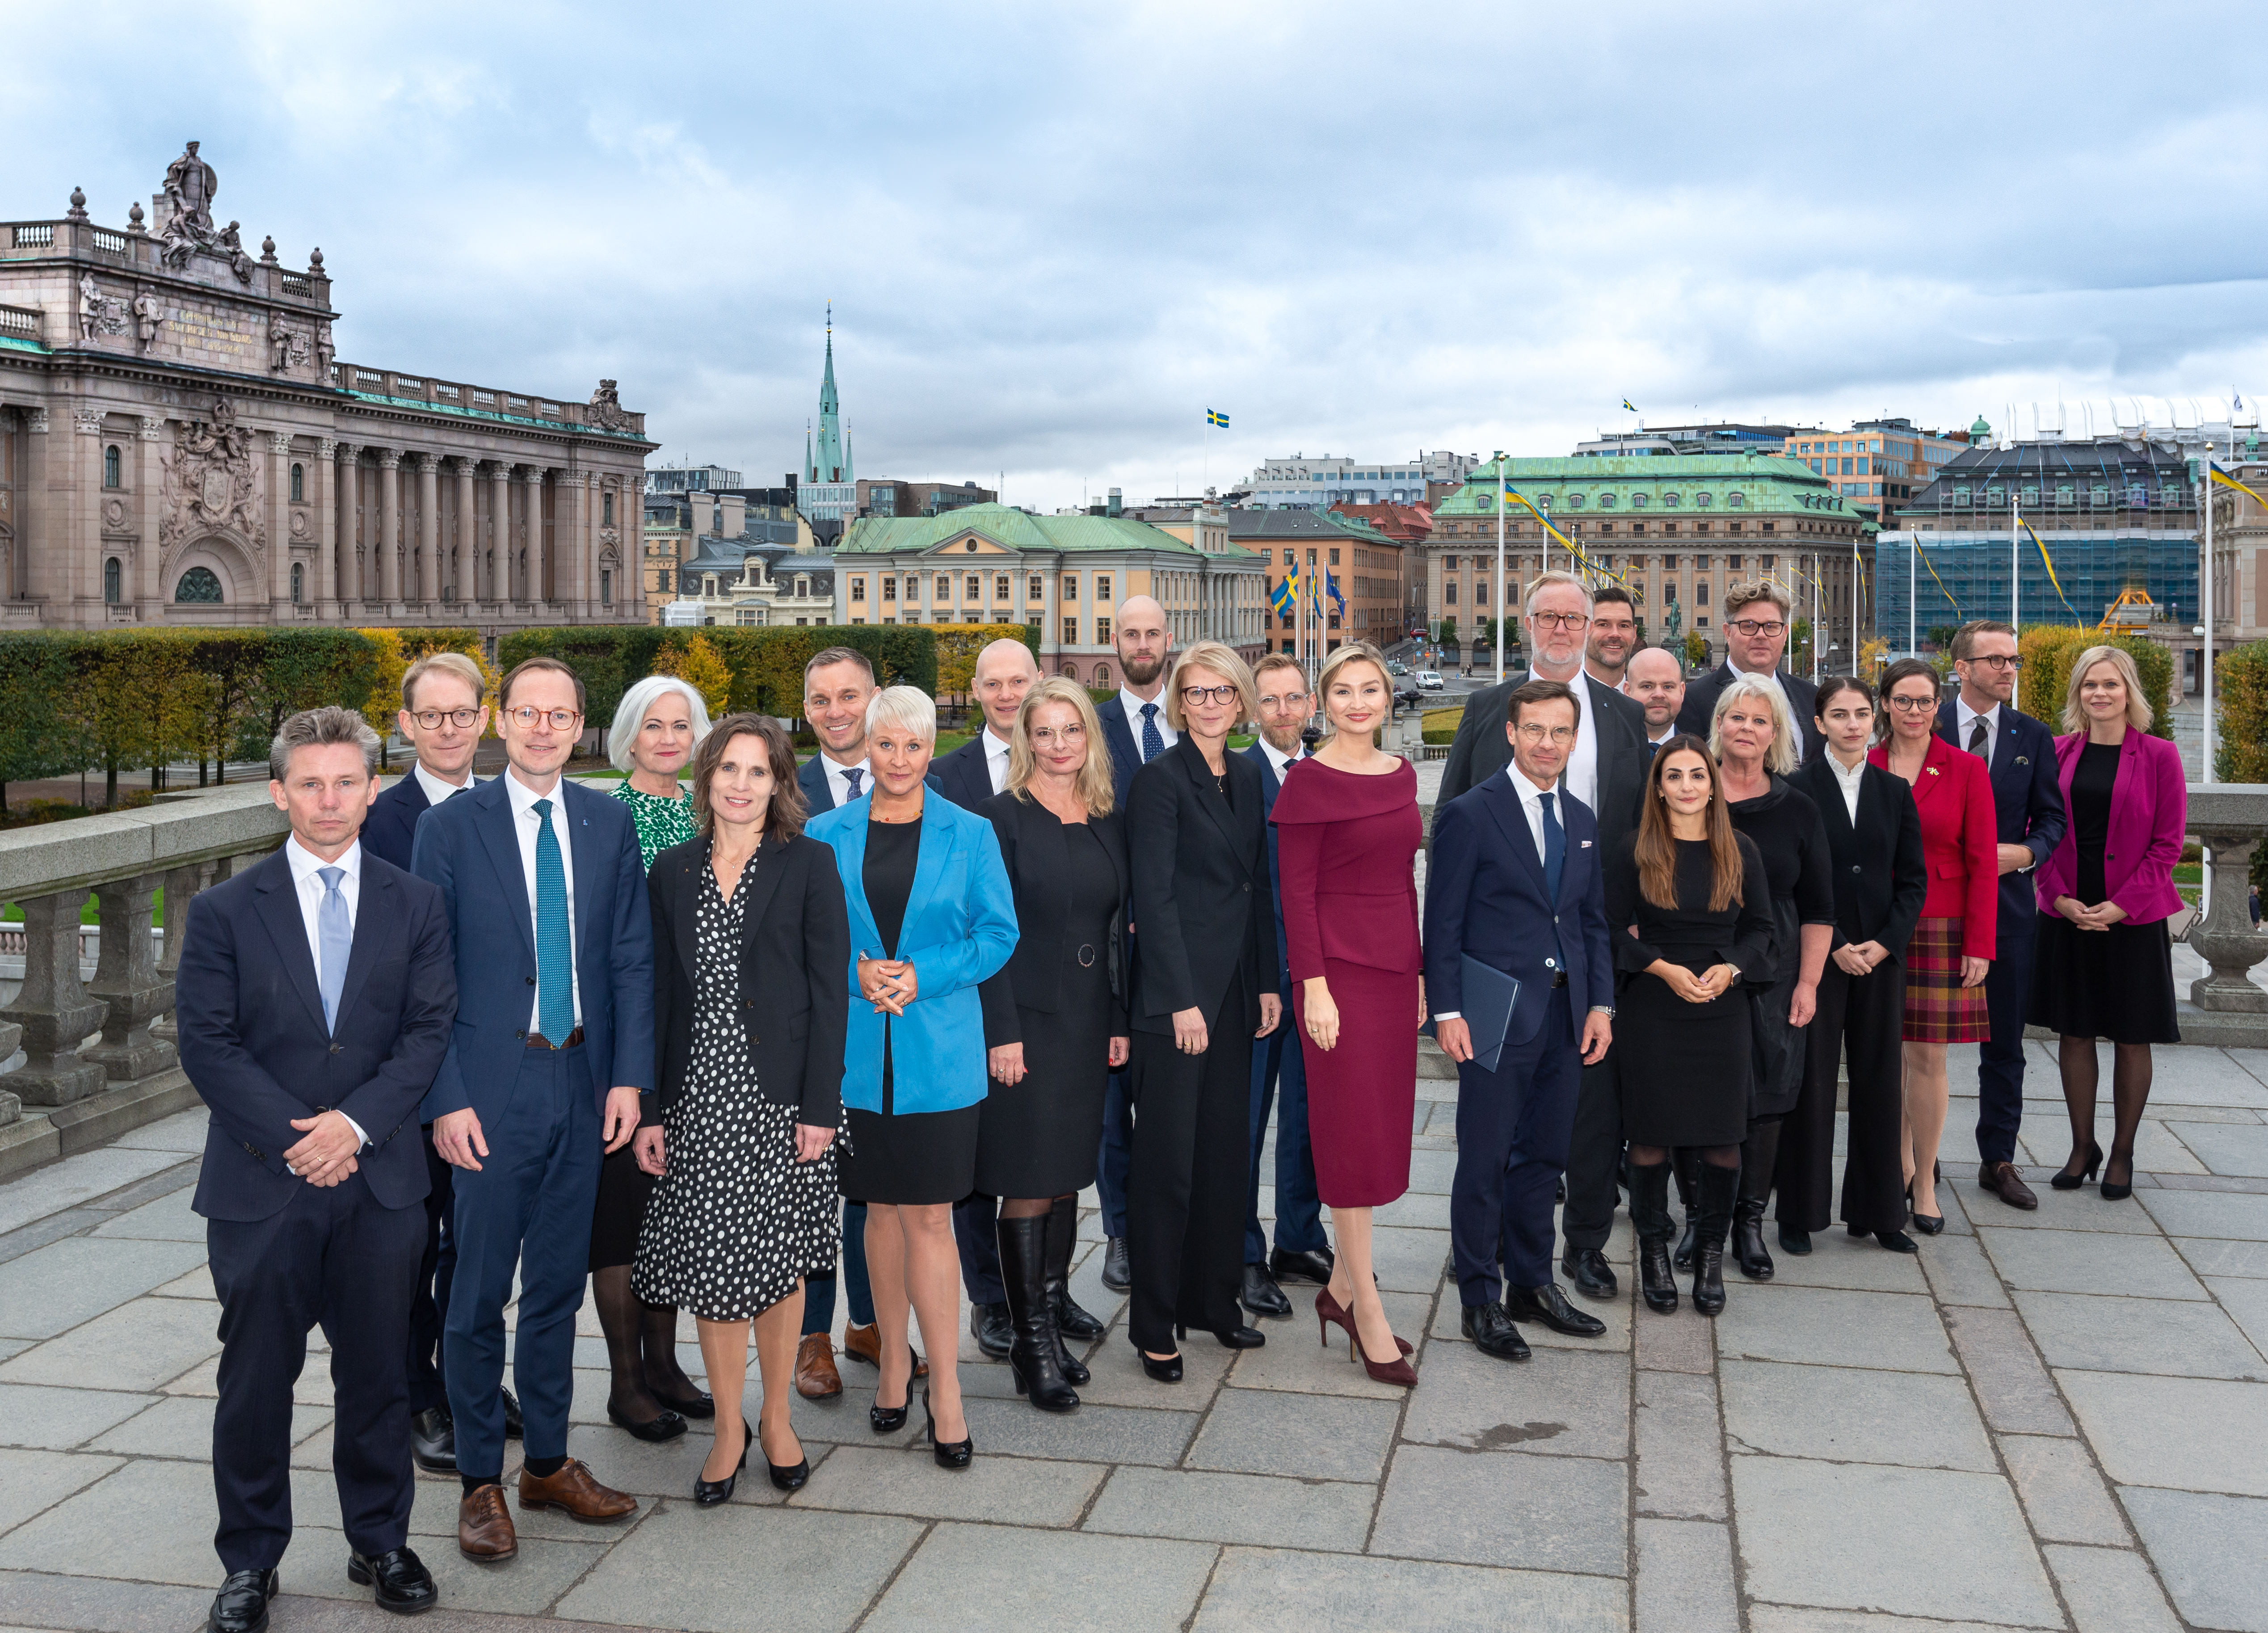 Newly appointed Kristersson Cabinet gathered at Lejonbacken outside the royal palace after the meeting with King Carl XVI Gustaf on 18 October 2022. (Photo: Frankie Fouganthin/Wikimedia Commons/CC BY-SA 4.0)